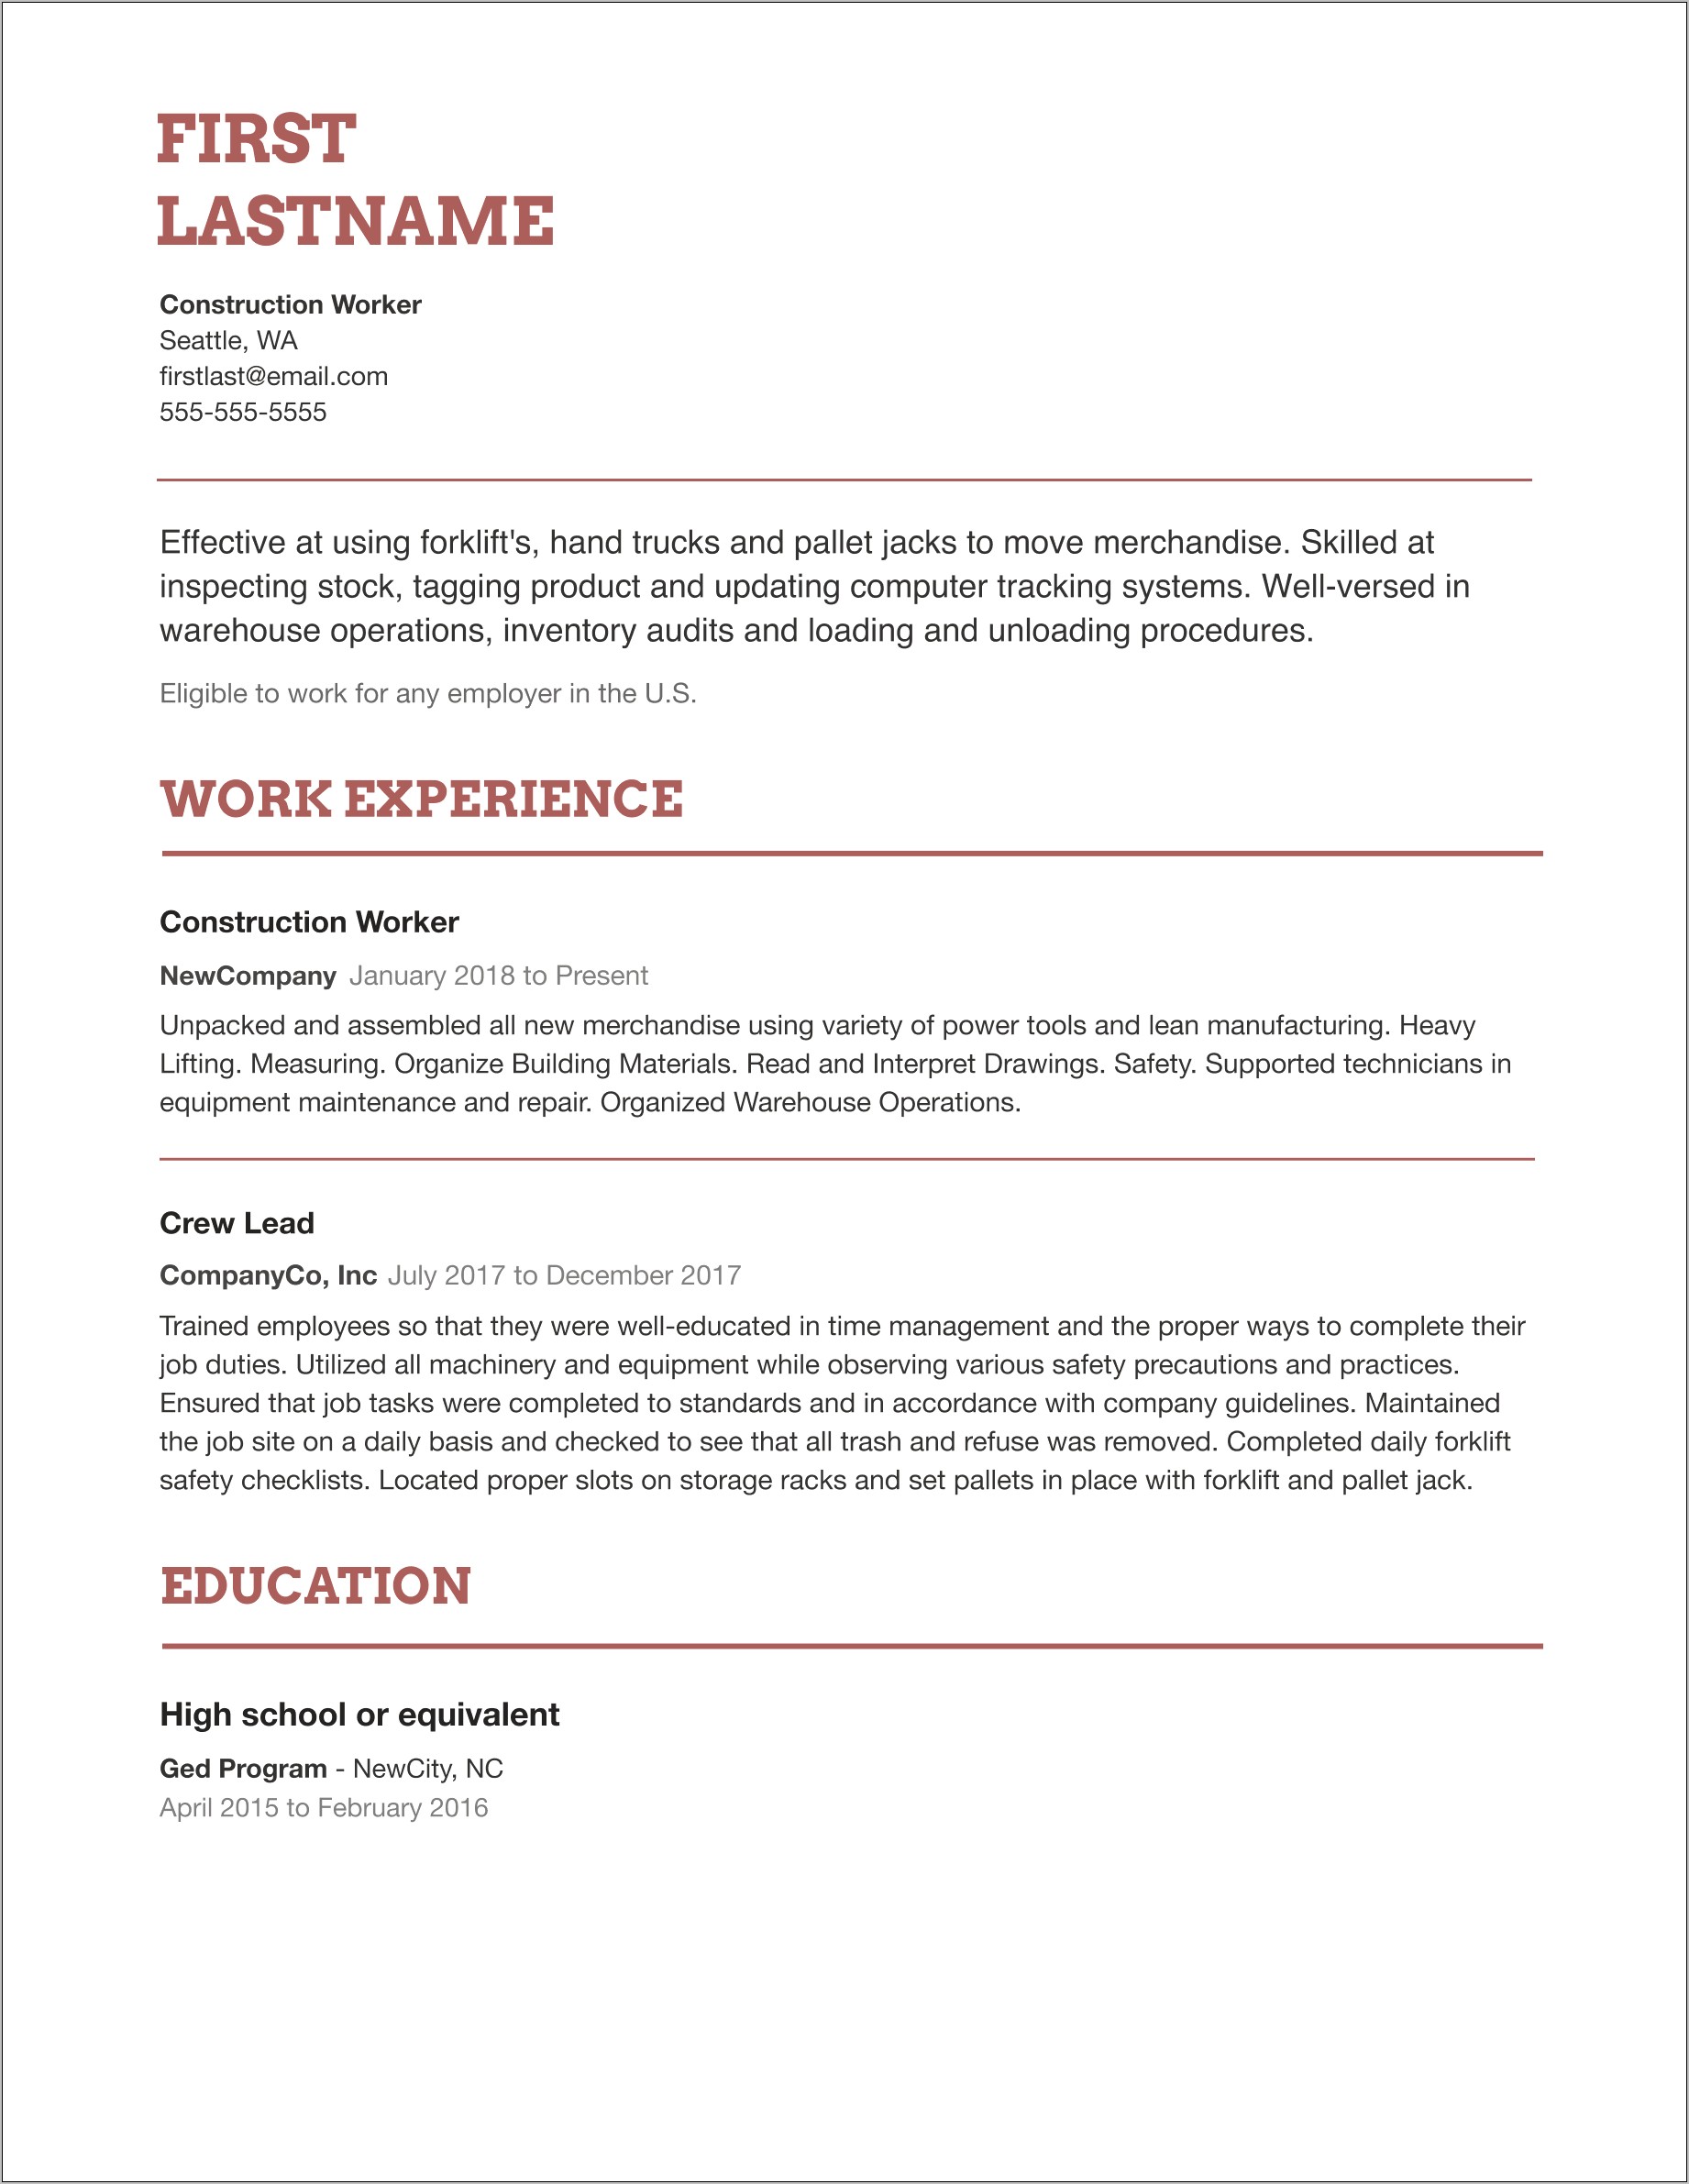 Need Template For My Own Resume